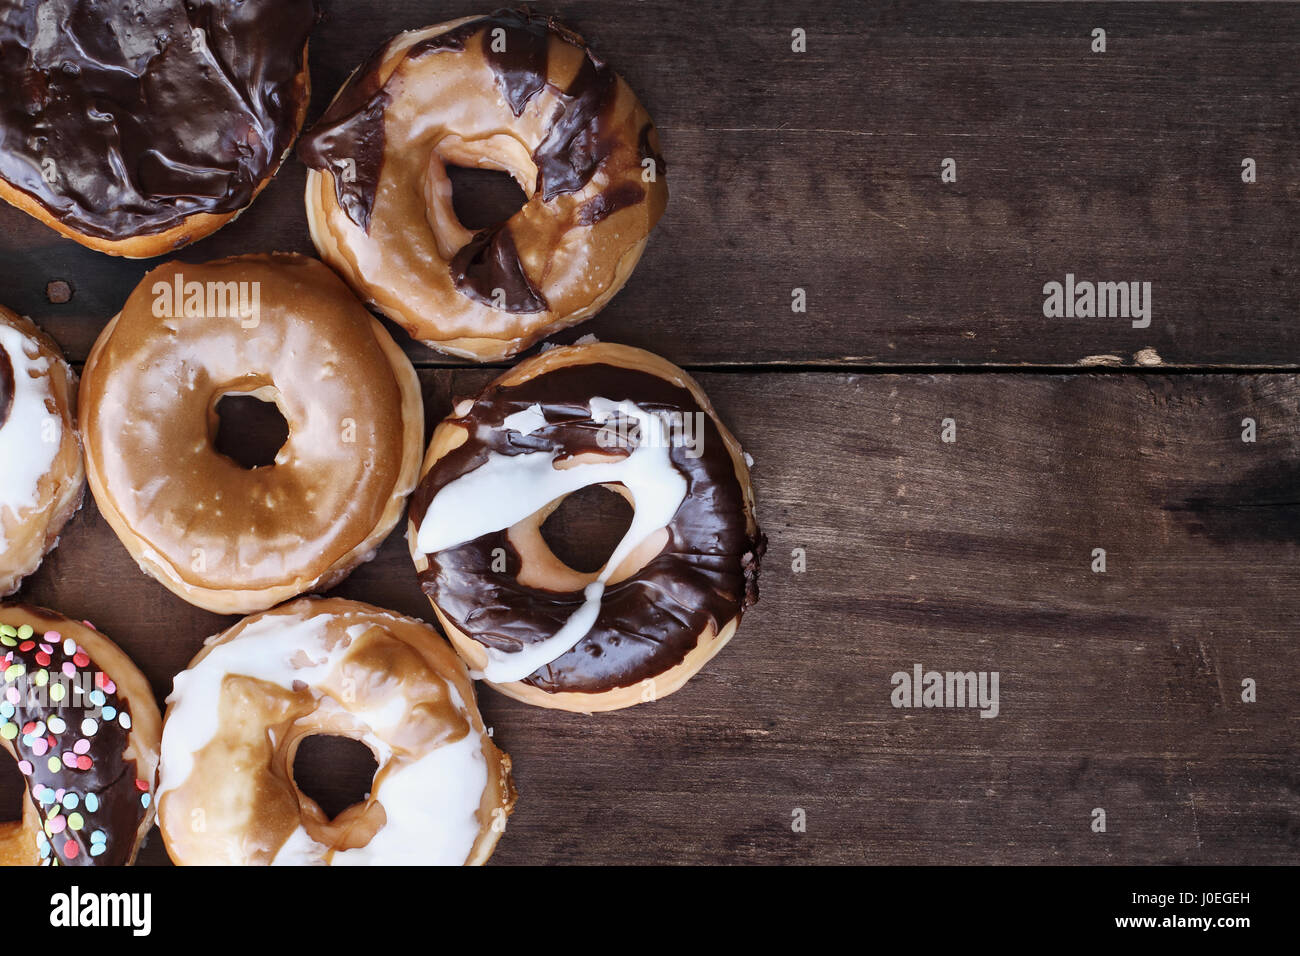 Background of chocolate, carmel, glazed and filled donuts over a rustic background with copy space. Image shot from overhead. Stock Photo